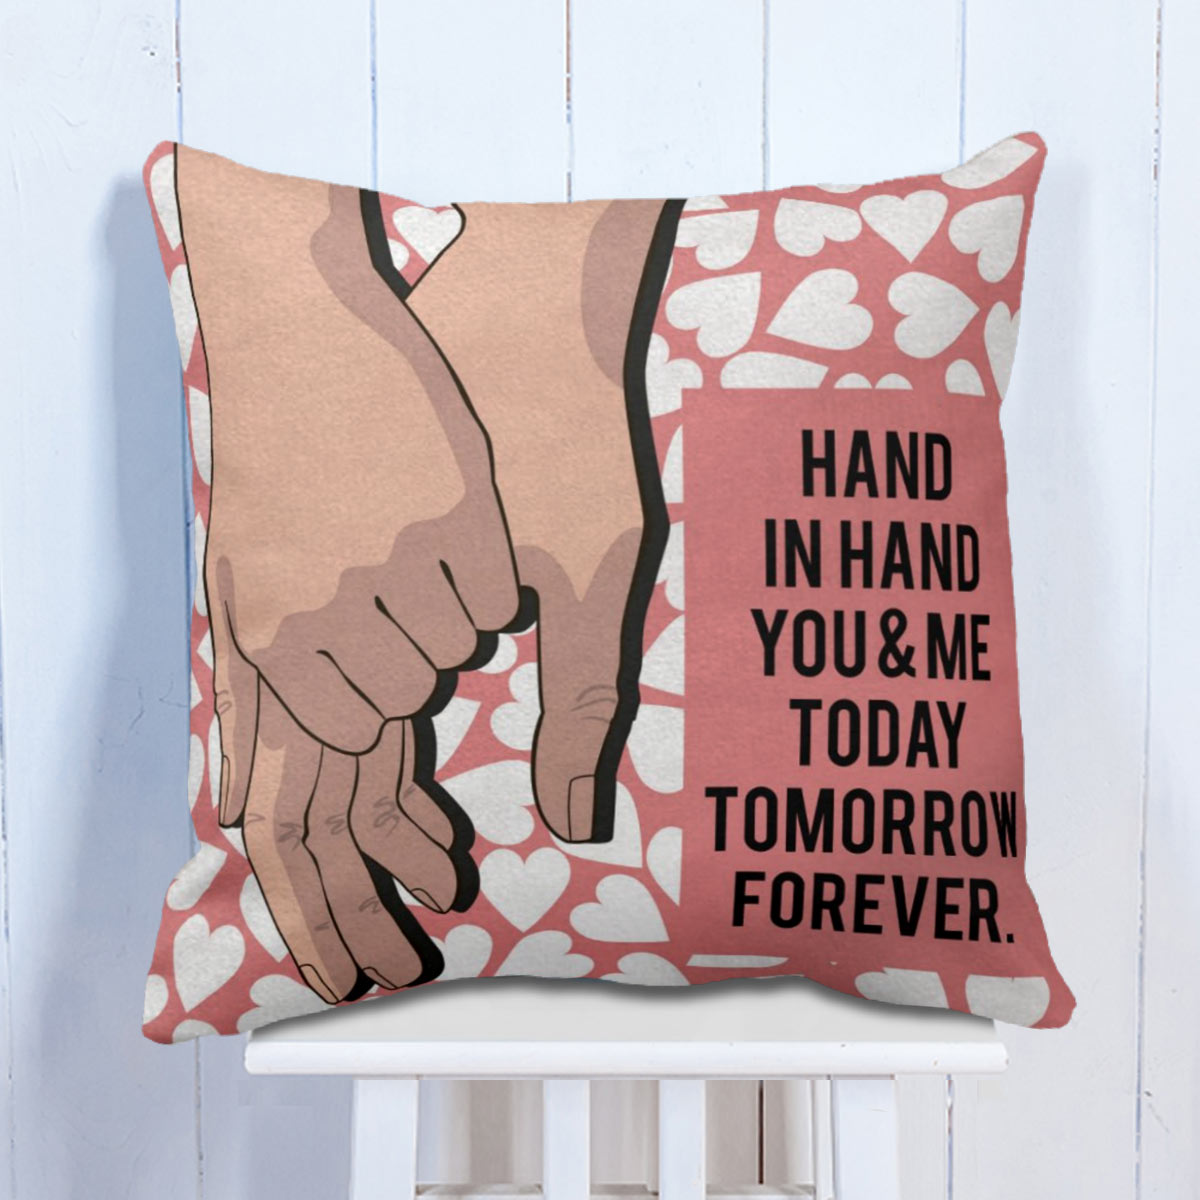 Hand in Hand. You & Me. Today. Tomorrow. Forever